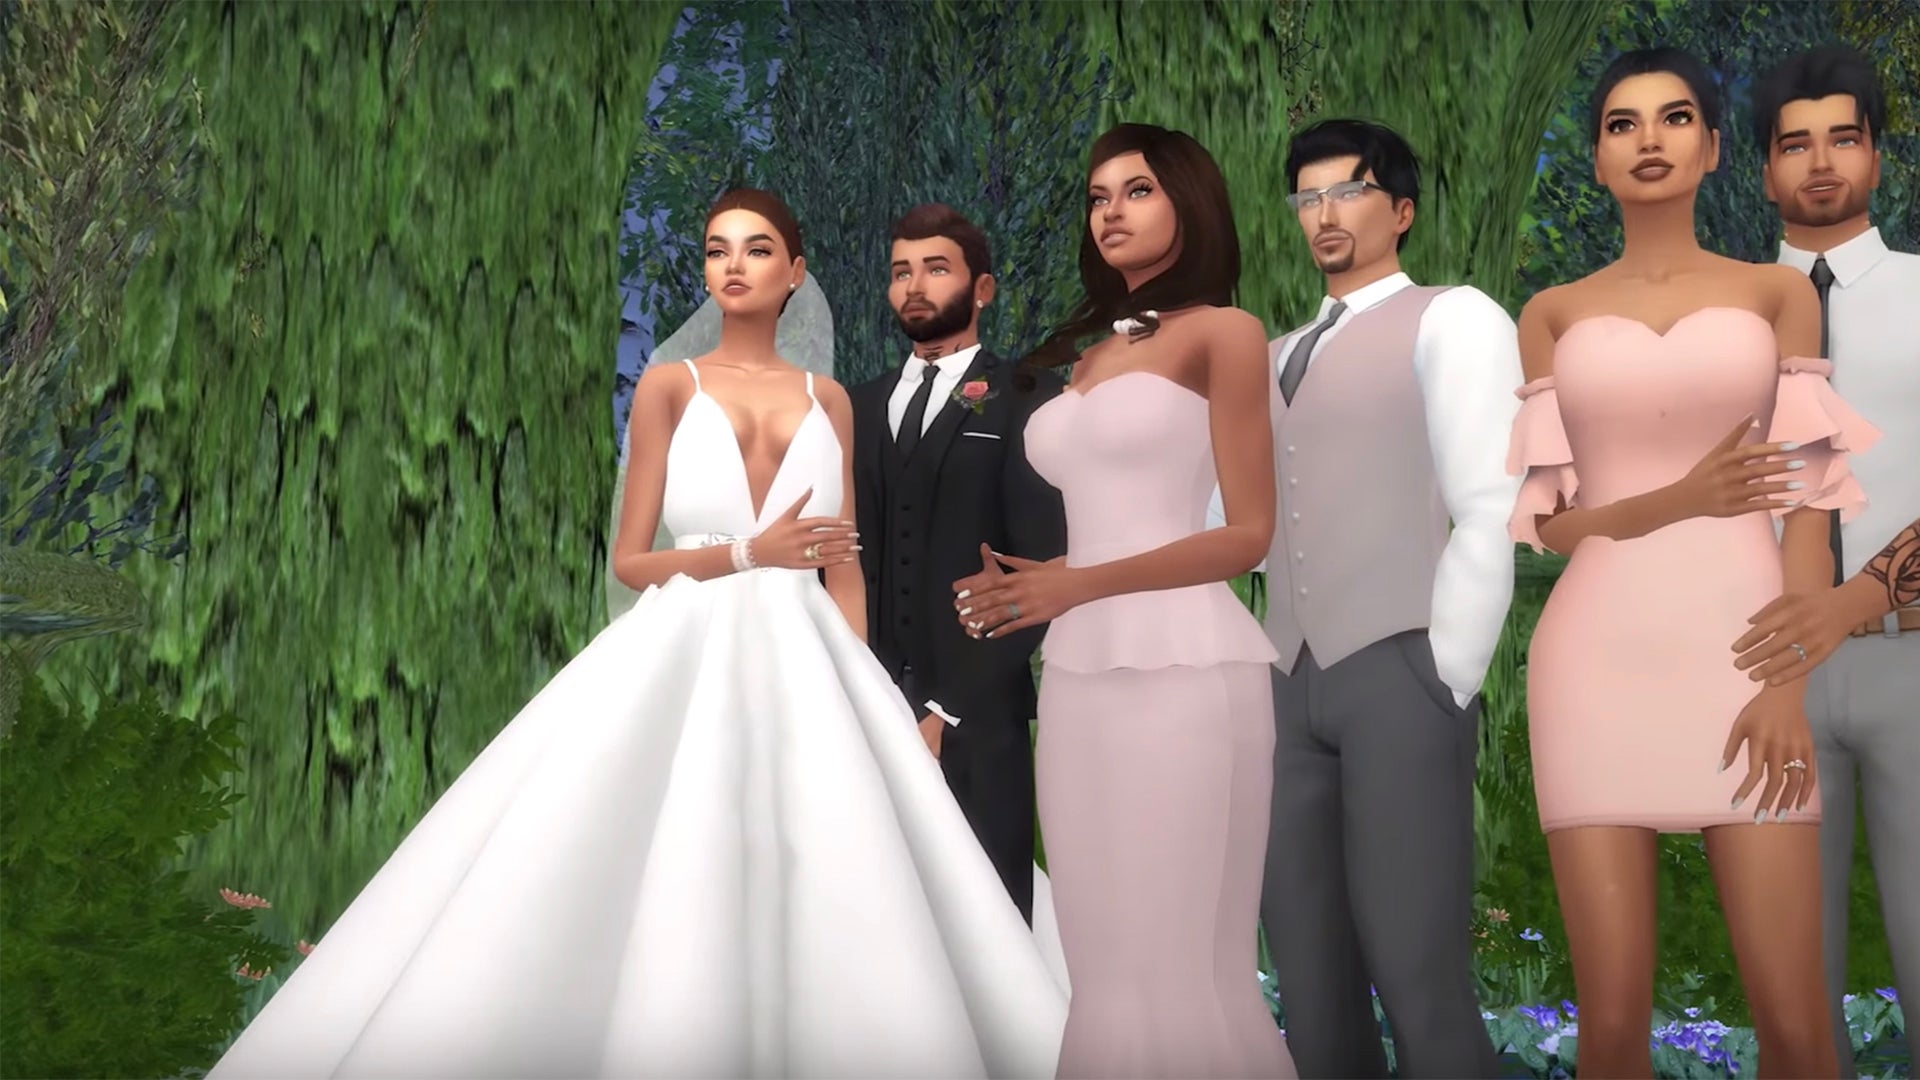 Image for How a The Sims Machinima About a Pregnant 16-Year-Old Spawned a Soap Opera Dynasty